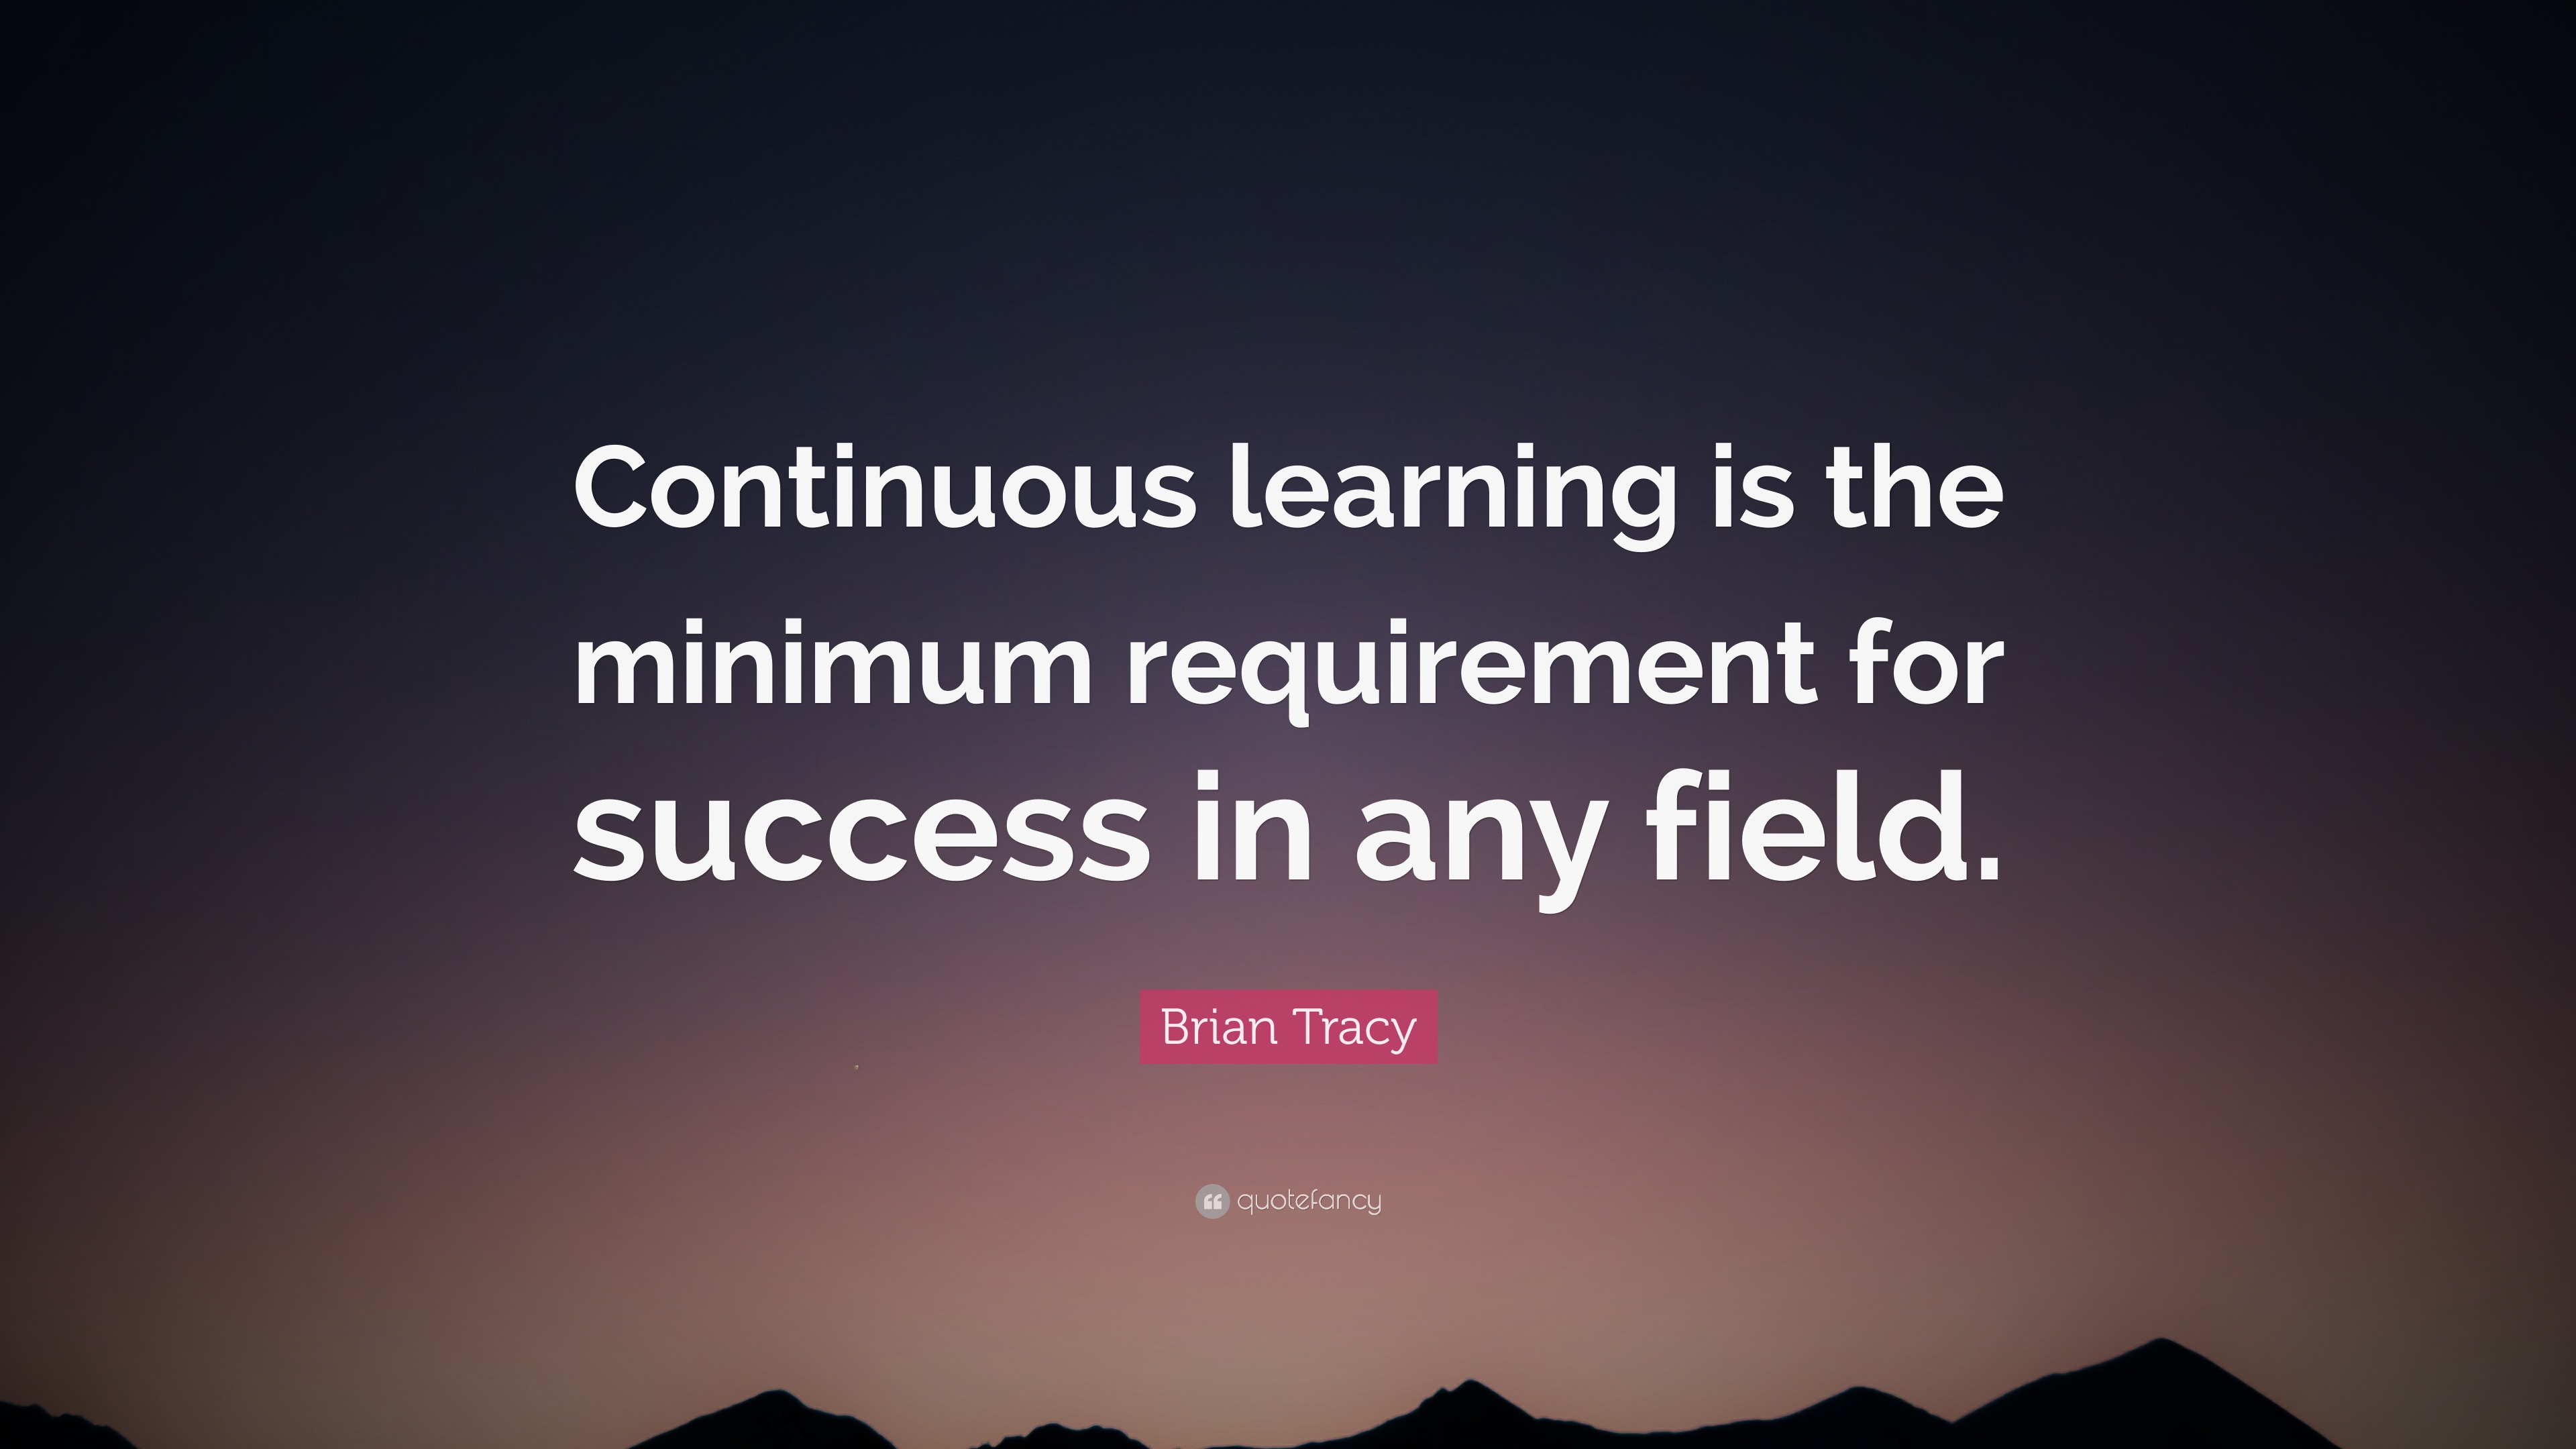 Brian Tracy Quote: “Continuous learning is the minimum requirement for